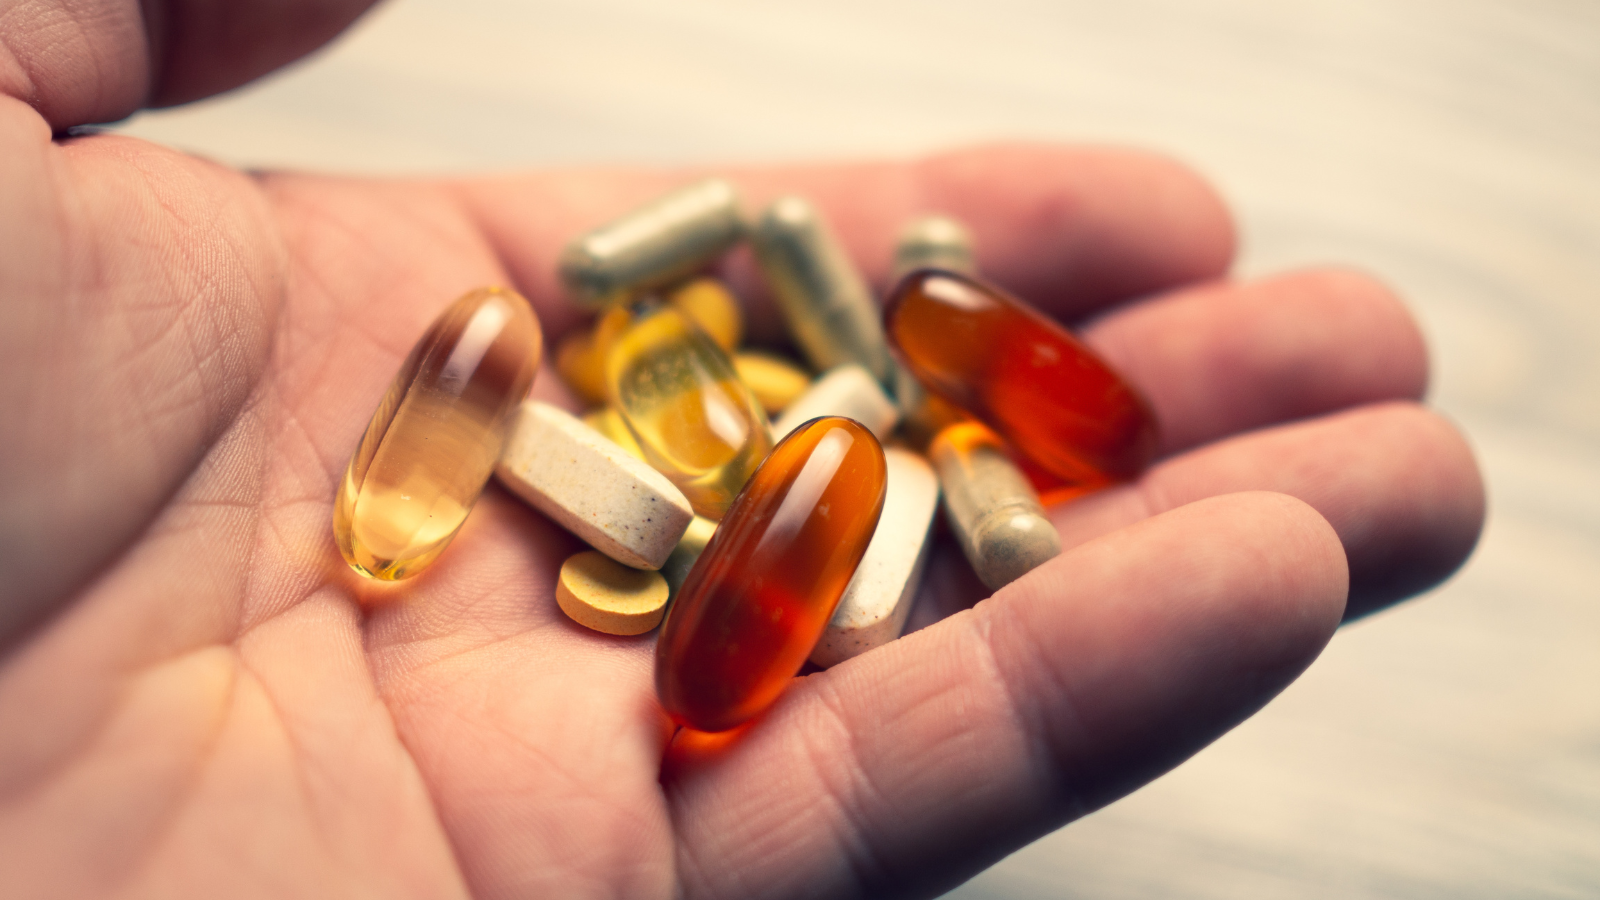 Supplements or Weight Loss Drugs: Is there a supplement that works like Ozempic?